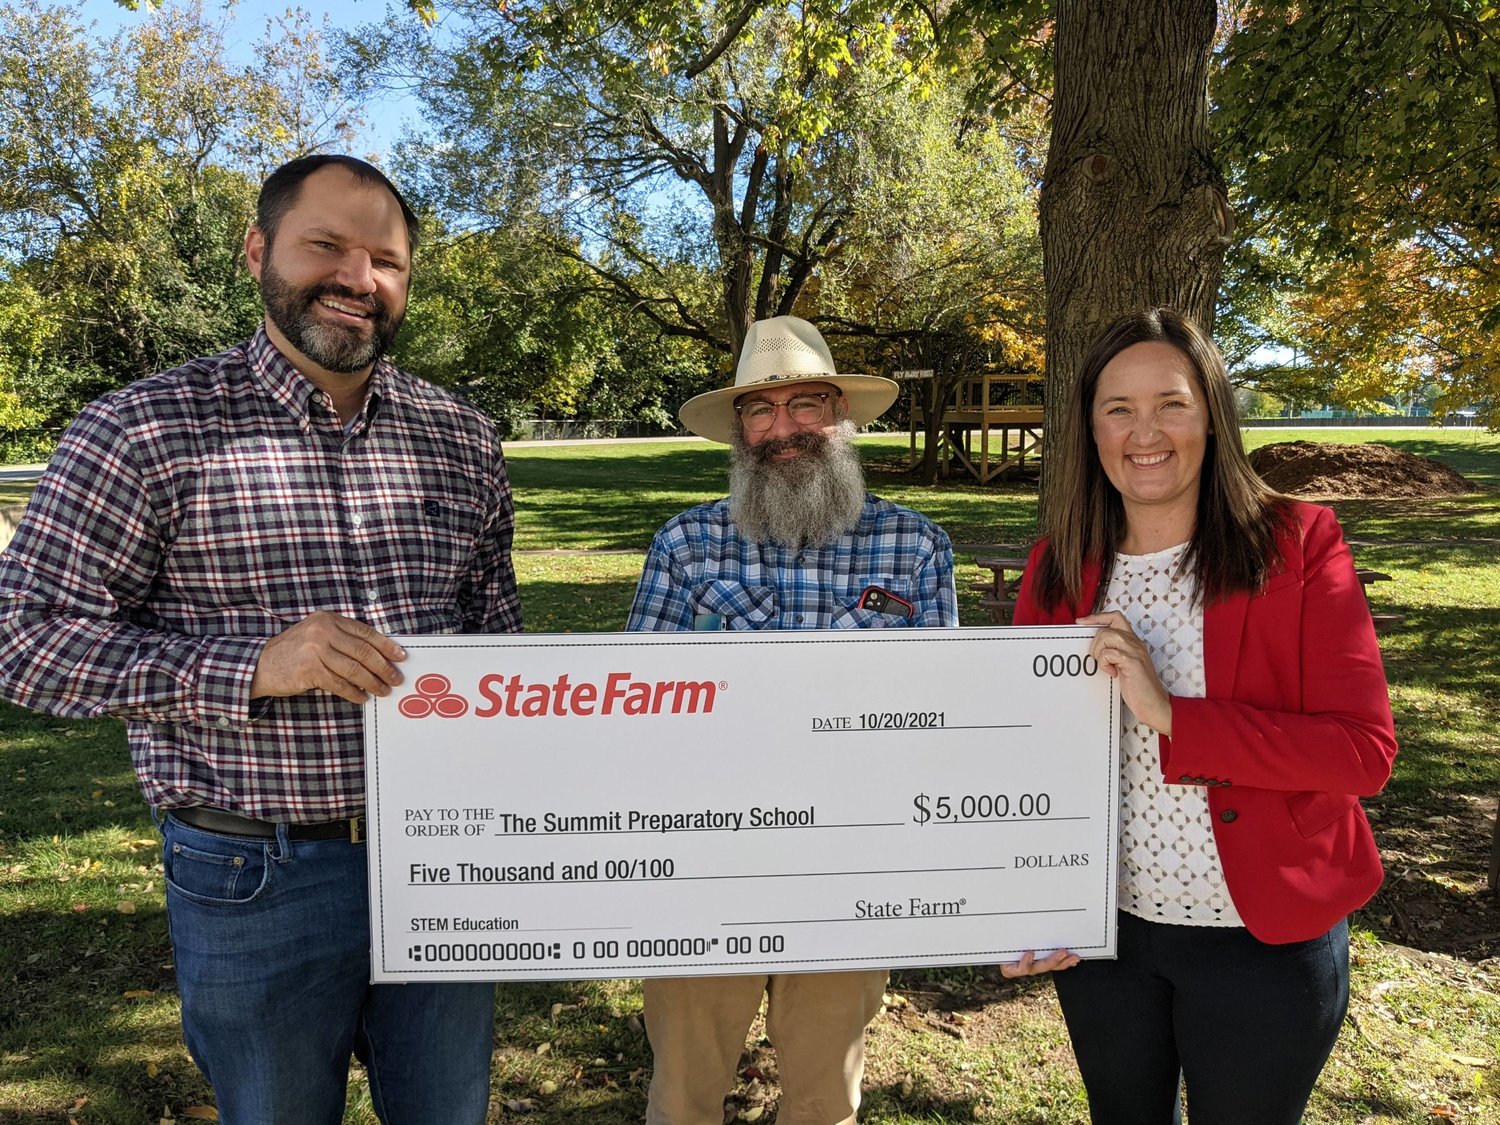 From left, Jordan Heinz of State Farm presents a grant check to Summit's Rob Powers and Katie Heet.